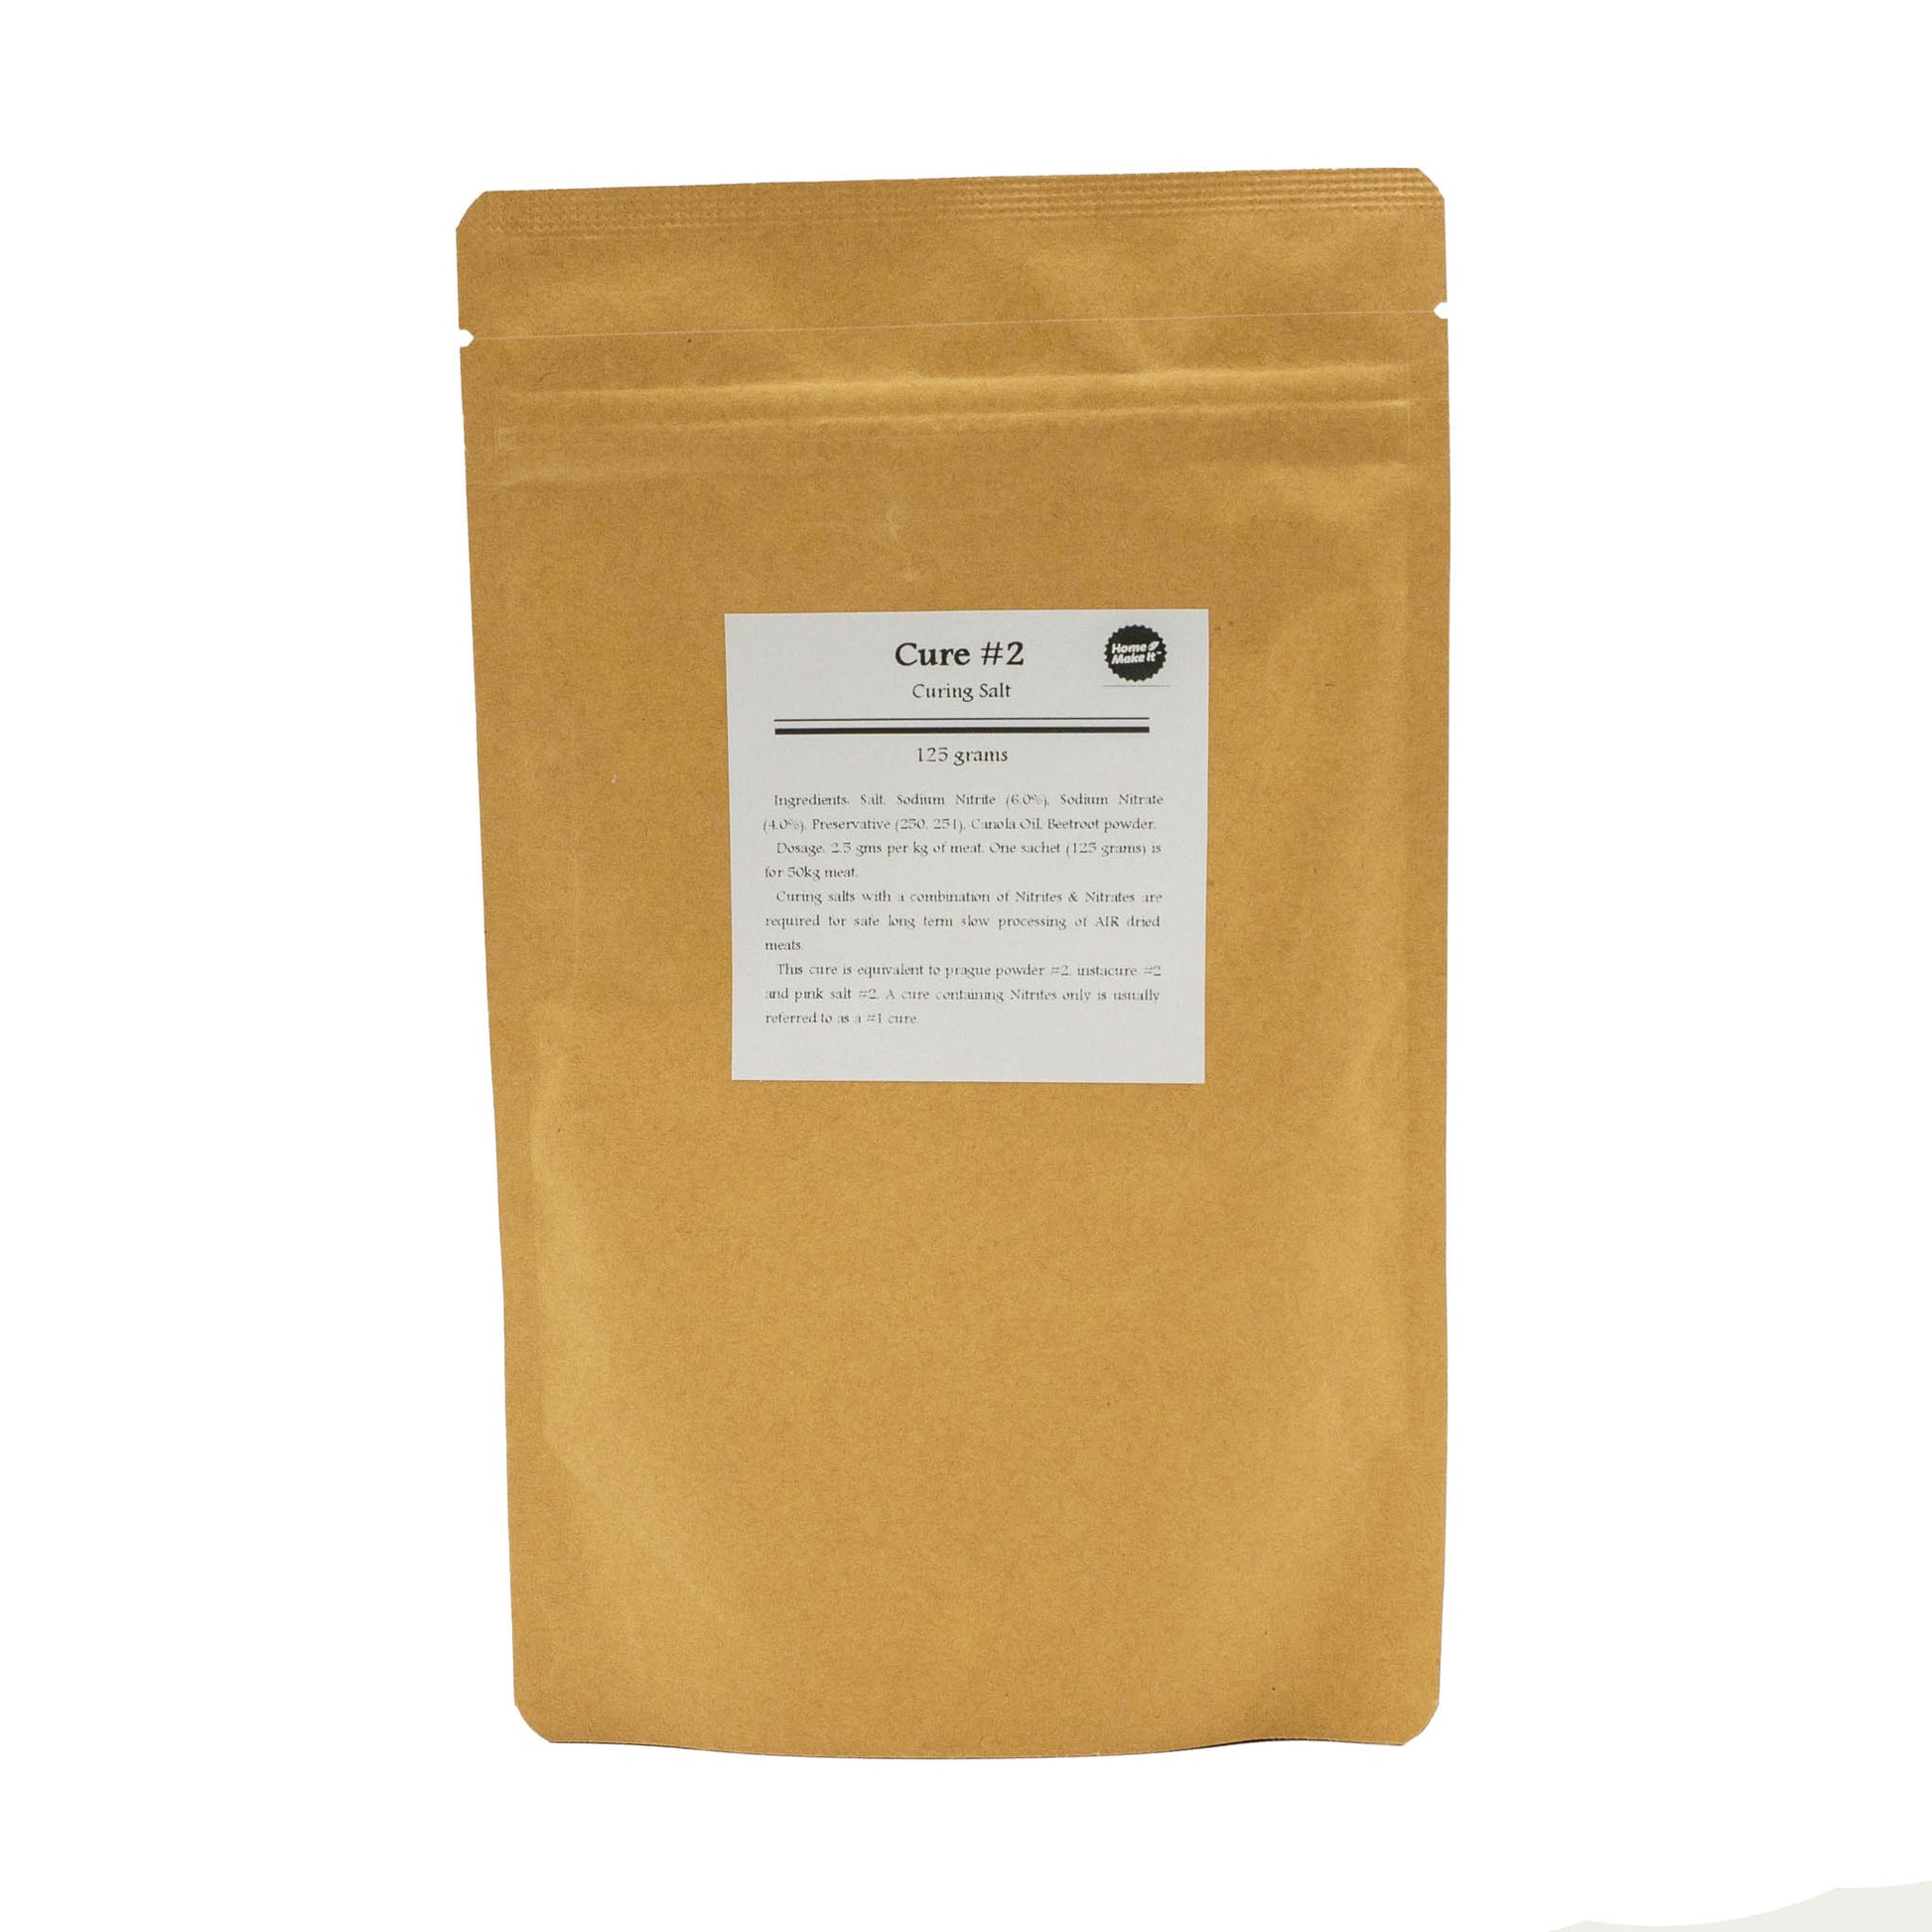 250 gram bag of Cure #2 curing salt with a combination of nitrites and nitrates are required for safe long term slow processing of air dried meats